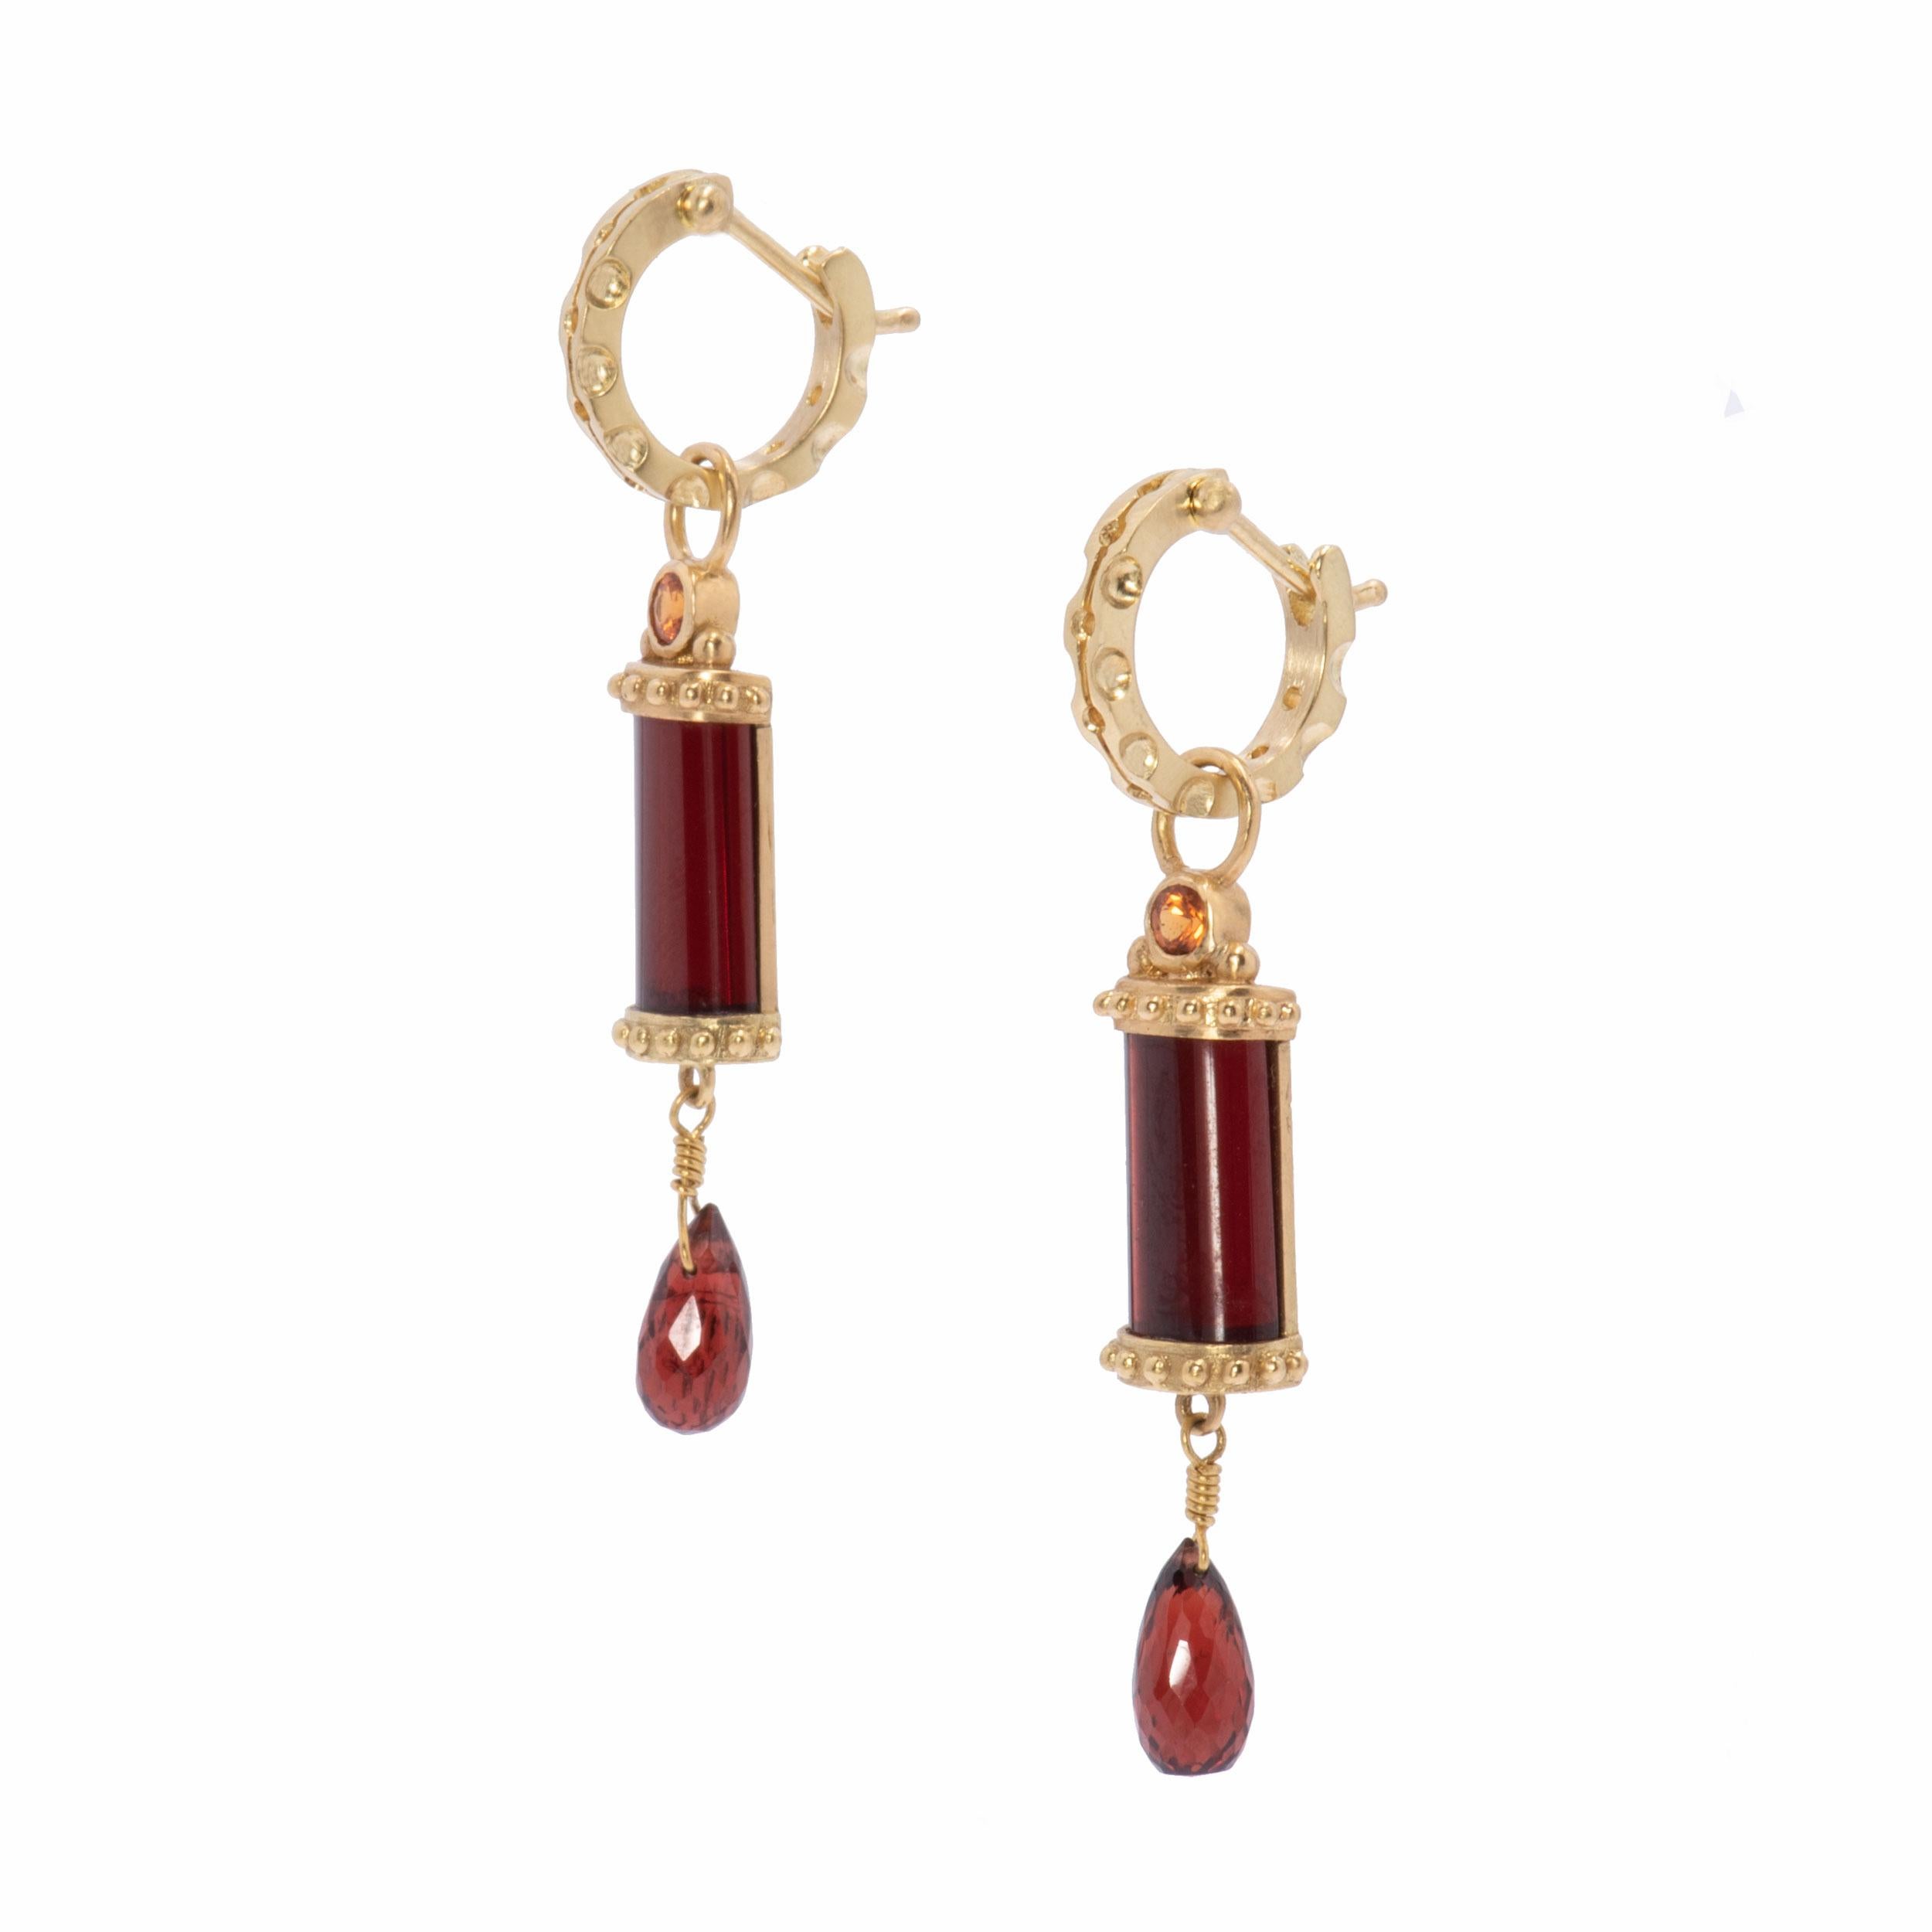 The drama of these long Wine Red Garnet Column Drop Earrings cannot be overstated. With a rounded cabochon front, wine red garnets are set in 18k gold with beaded tops and bases, and backed the length in 18k gold. Pumpkin colored spessartine garnets